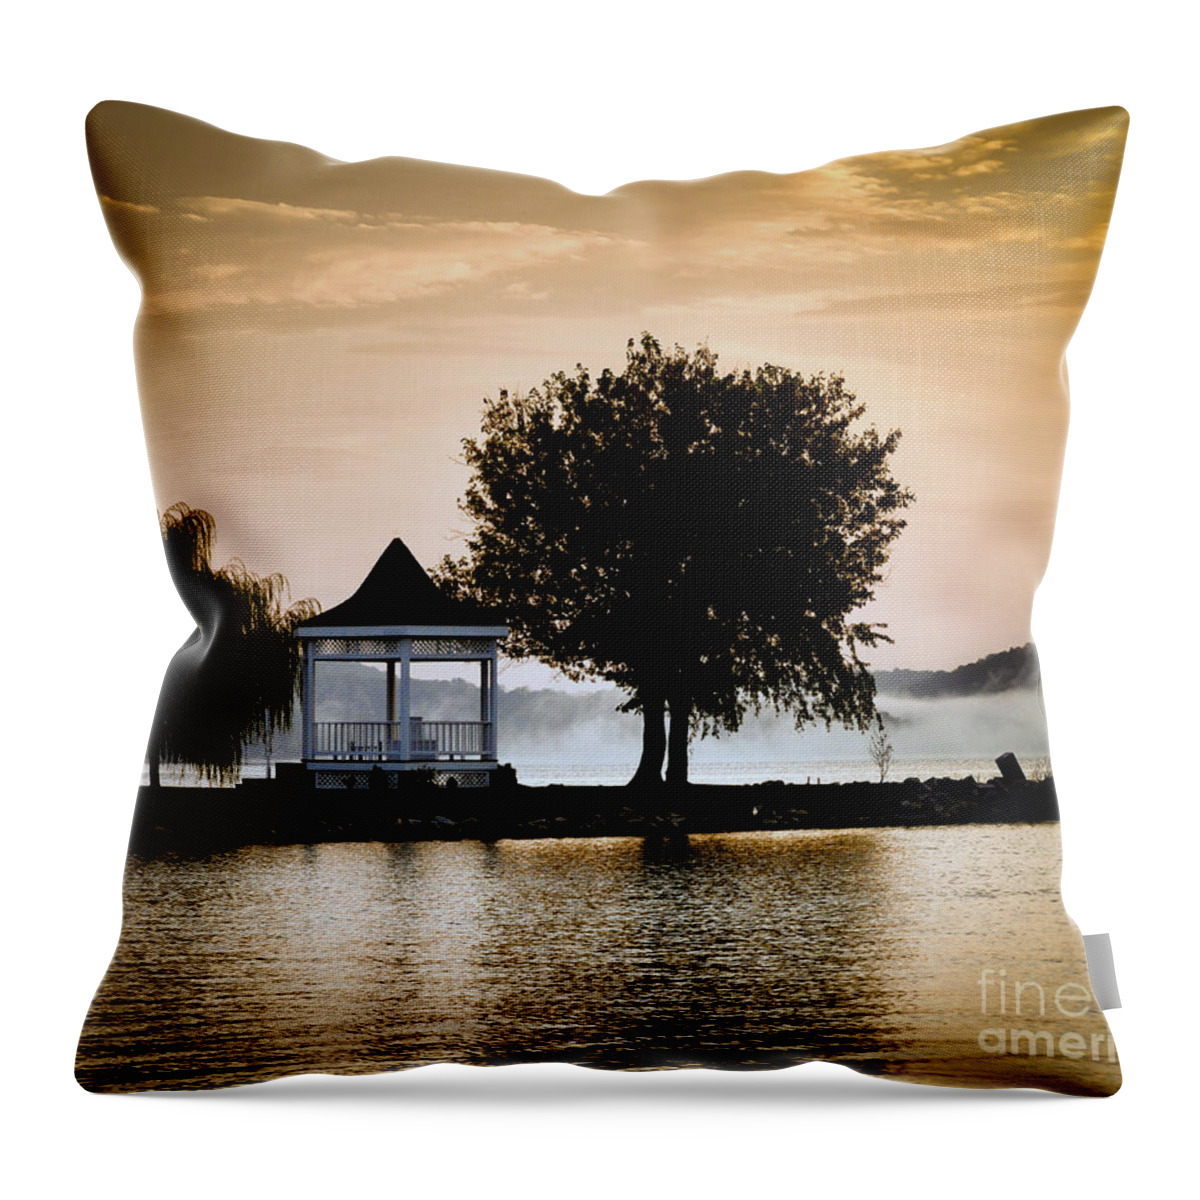 Sunrise Throw Pillow featuring the photograph Just Before Sunrise by Kerri Farley